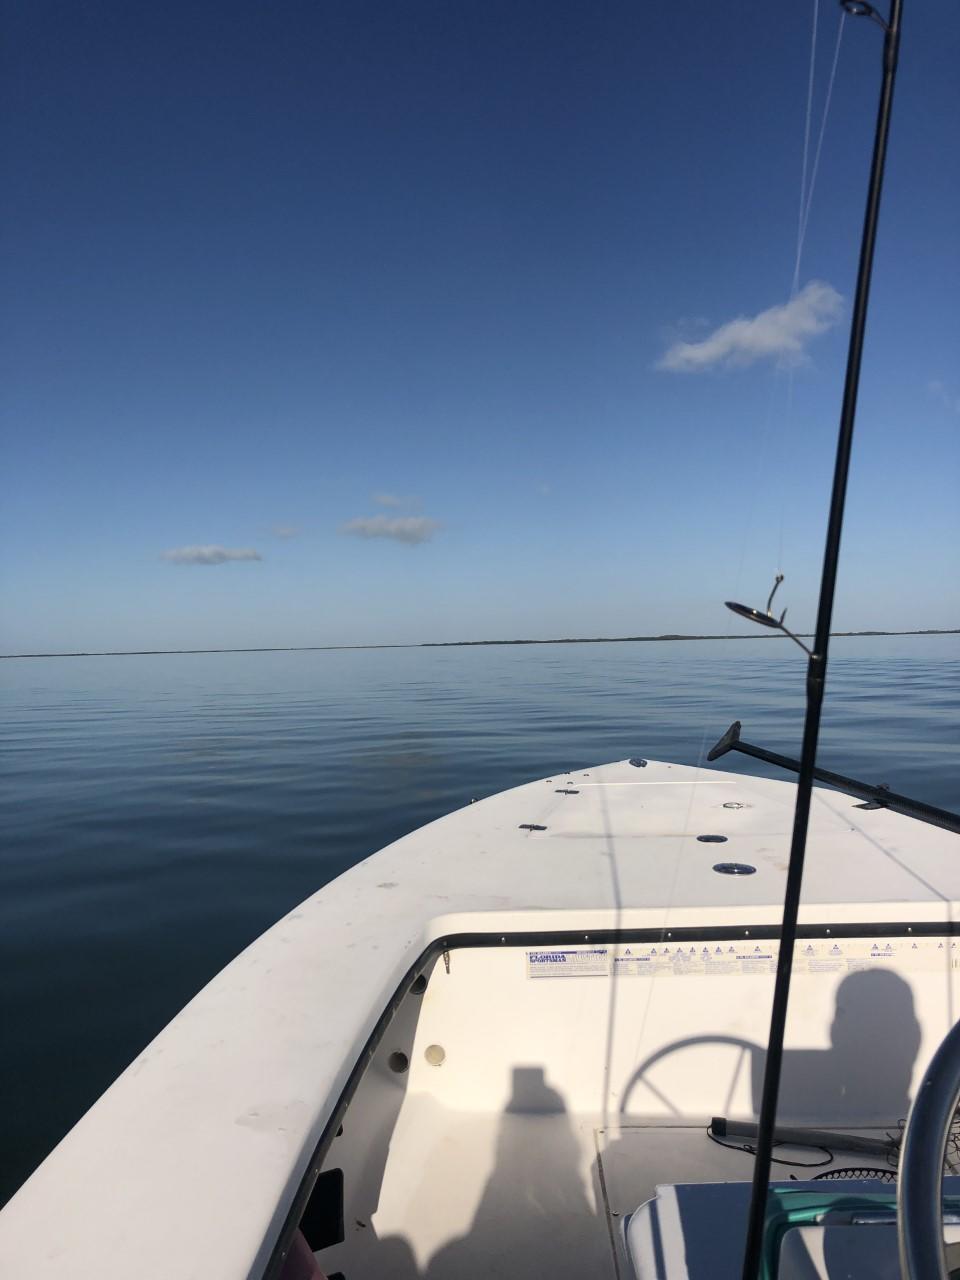 Private Fishing Tour in Key Largo